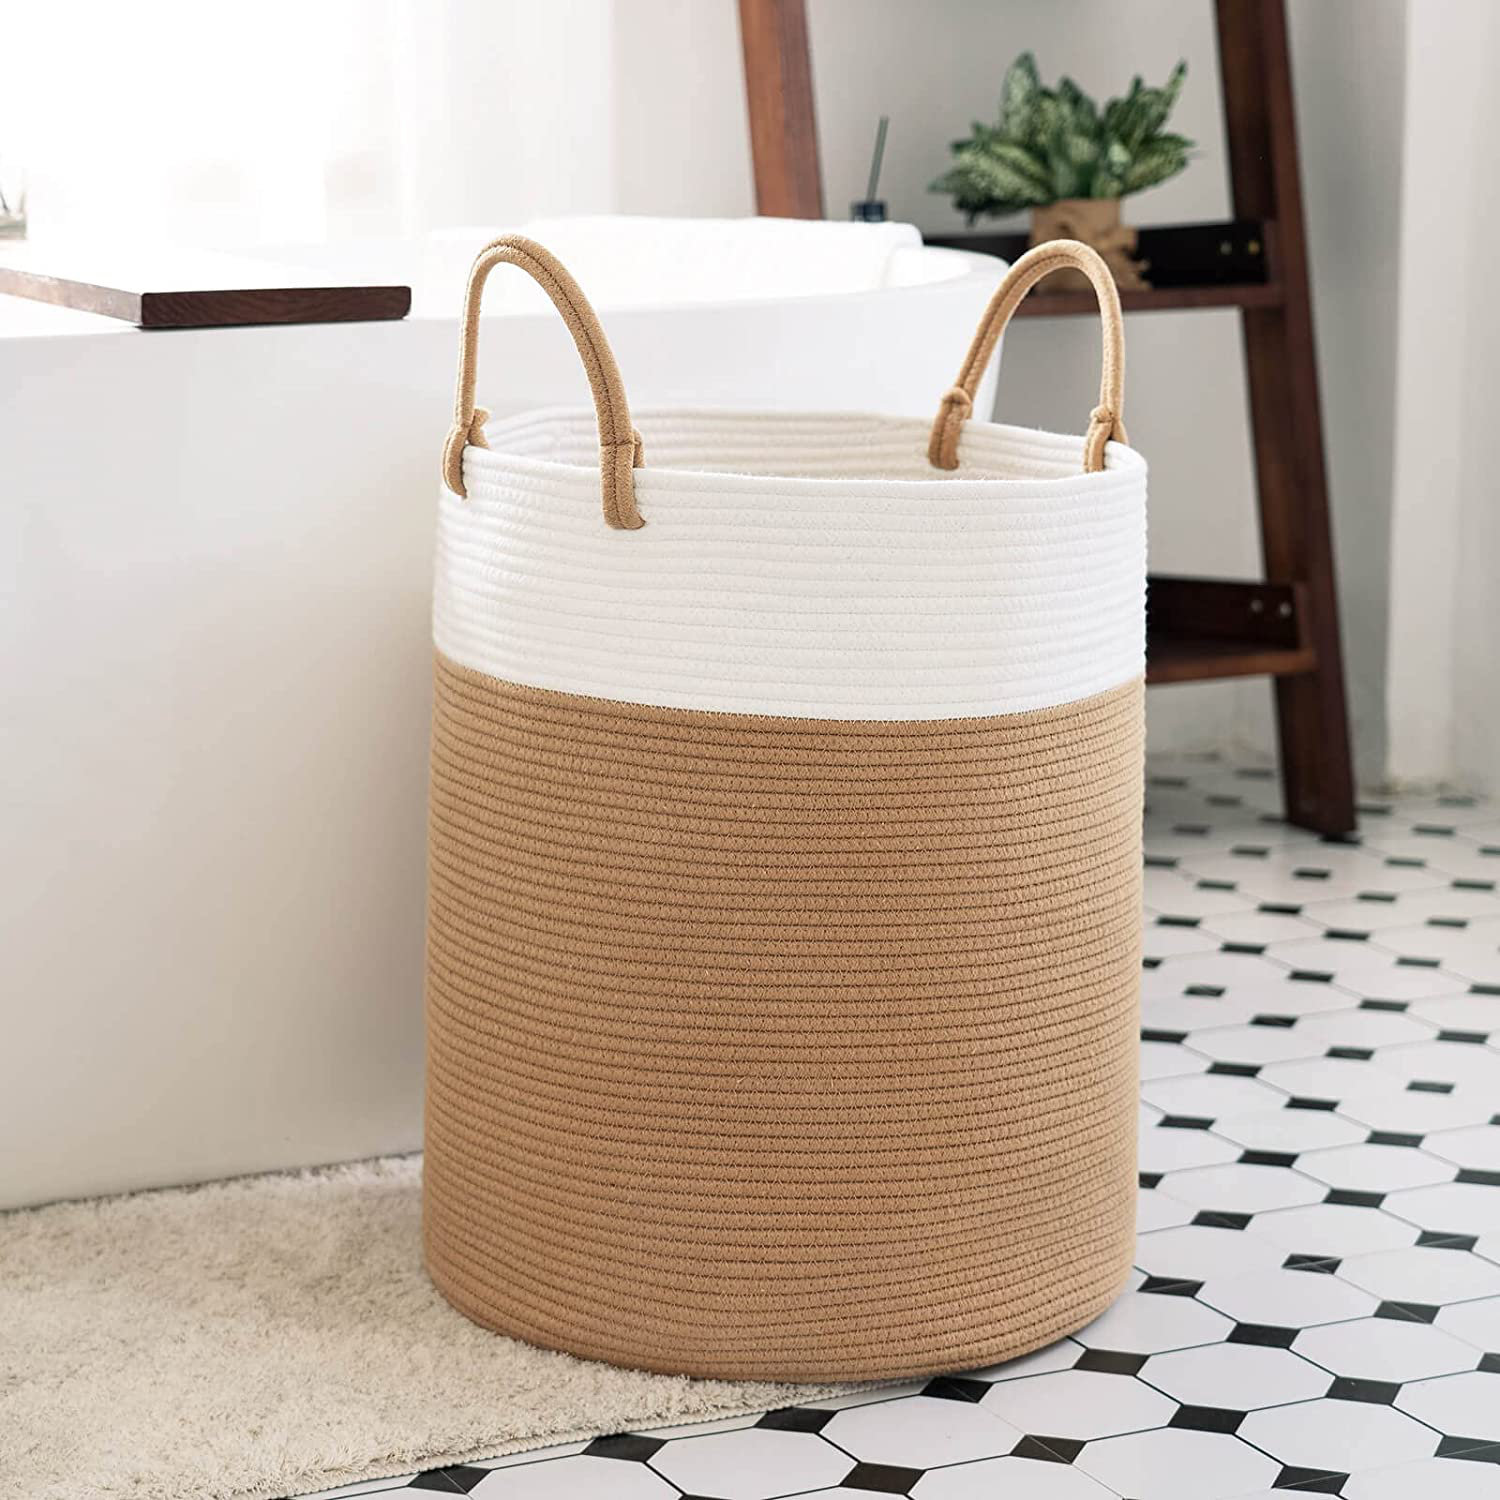 Gracie Oaks XLarge Round Cotton Rope Storage Basket Bin Organizer Laundry Hamper with Leather Handles, 21 x 21 x 14, Extra Large Blanket Woven Toy Basket for Baby